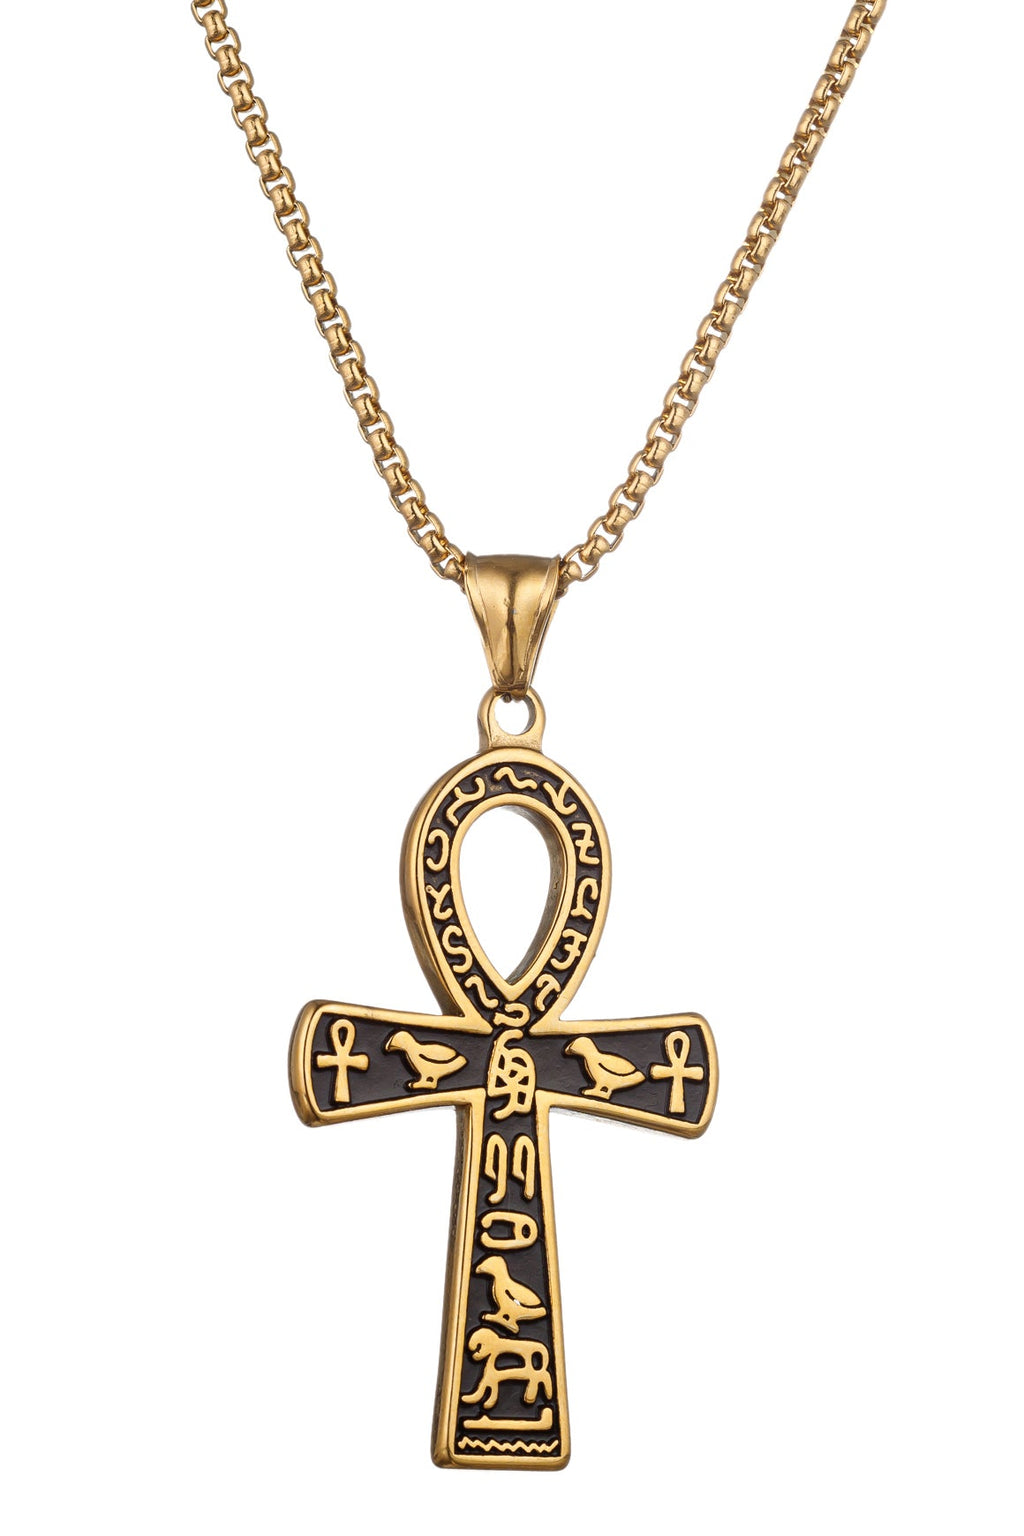 Embrace Timeless Elegance with Our Ankh Pendant Drop Necklace.